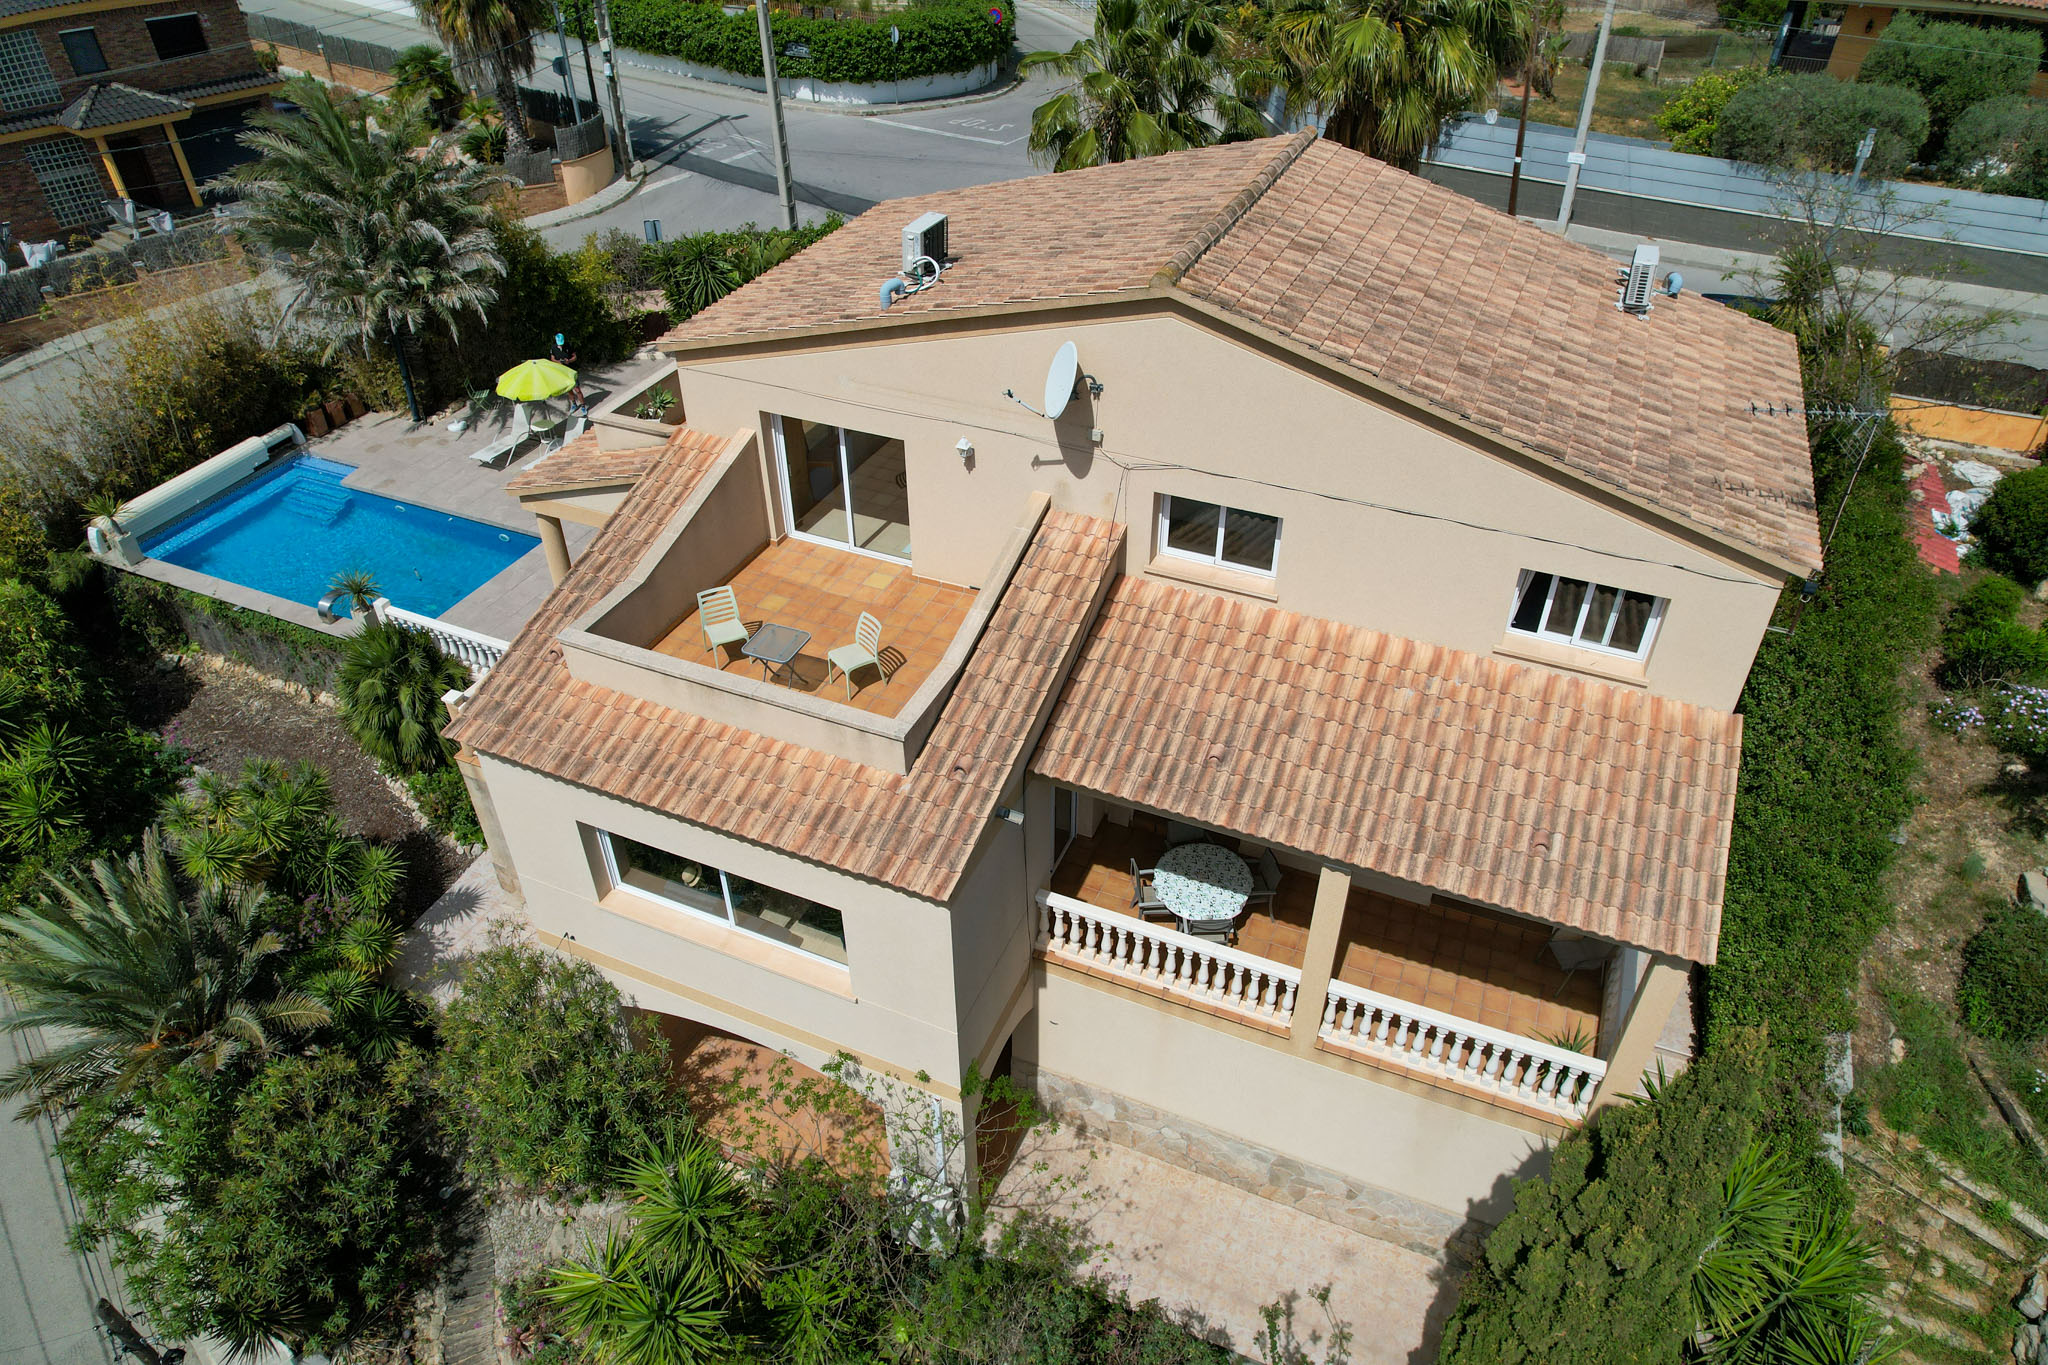 Villa in the Sitges hills with great views, no stairs